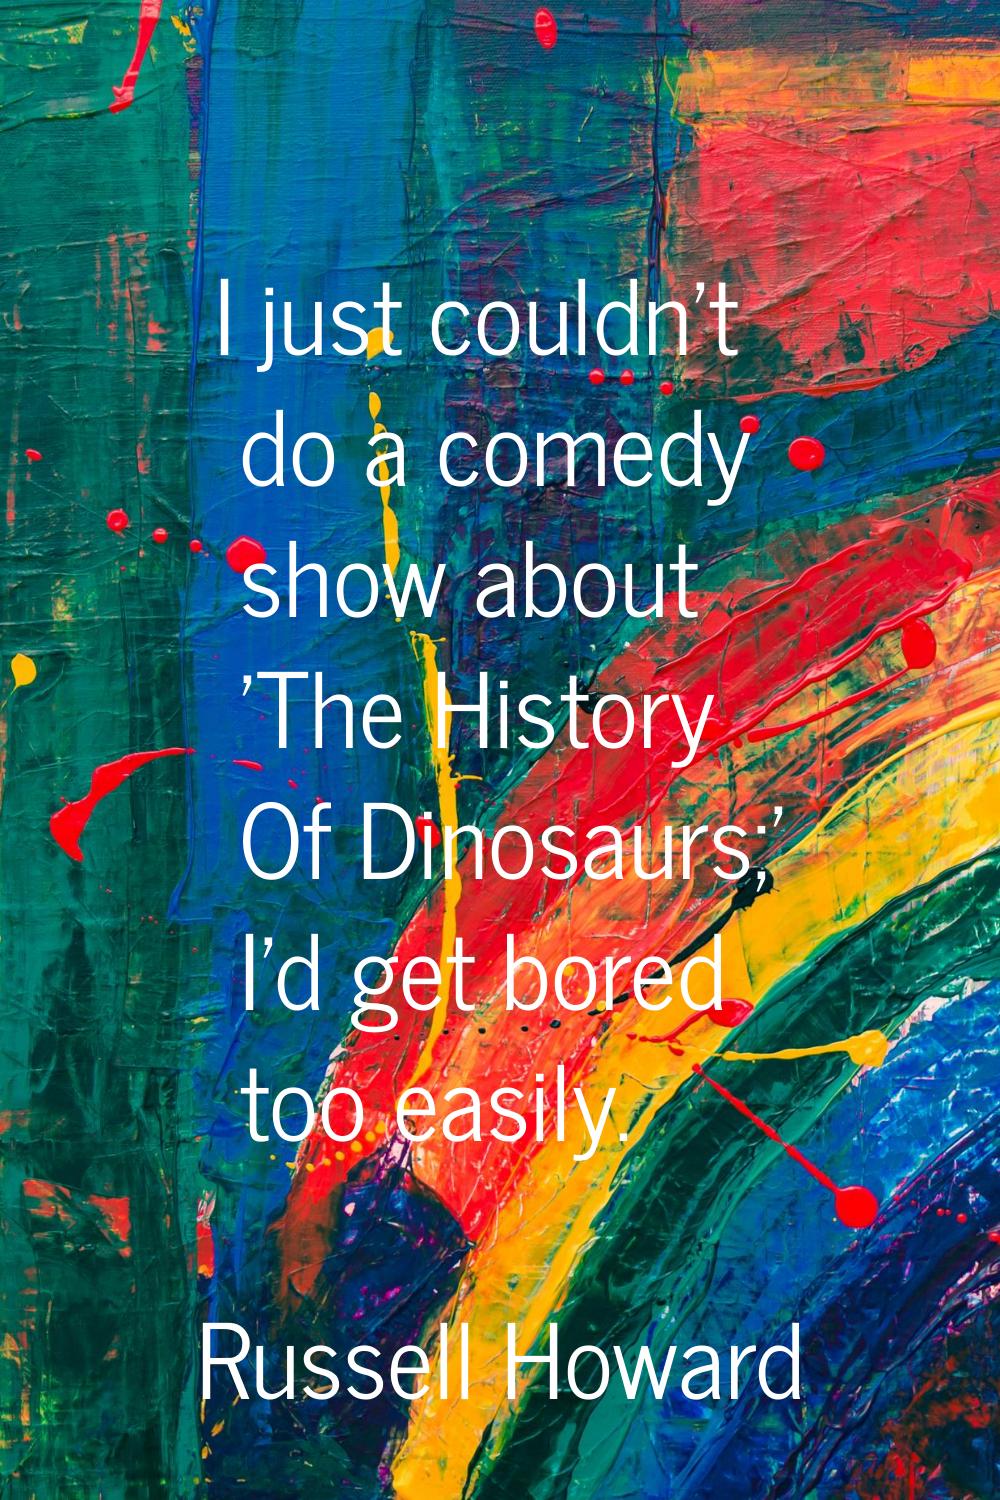 I just couldn't do a comedy show about 'The History Of Dinosaurs;' I'd get bored too easily.